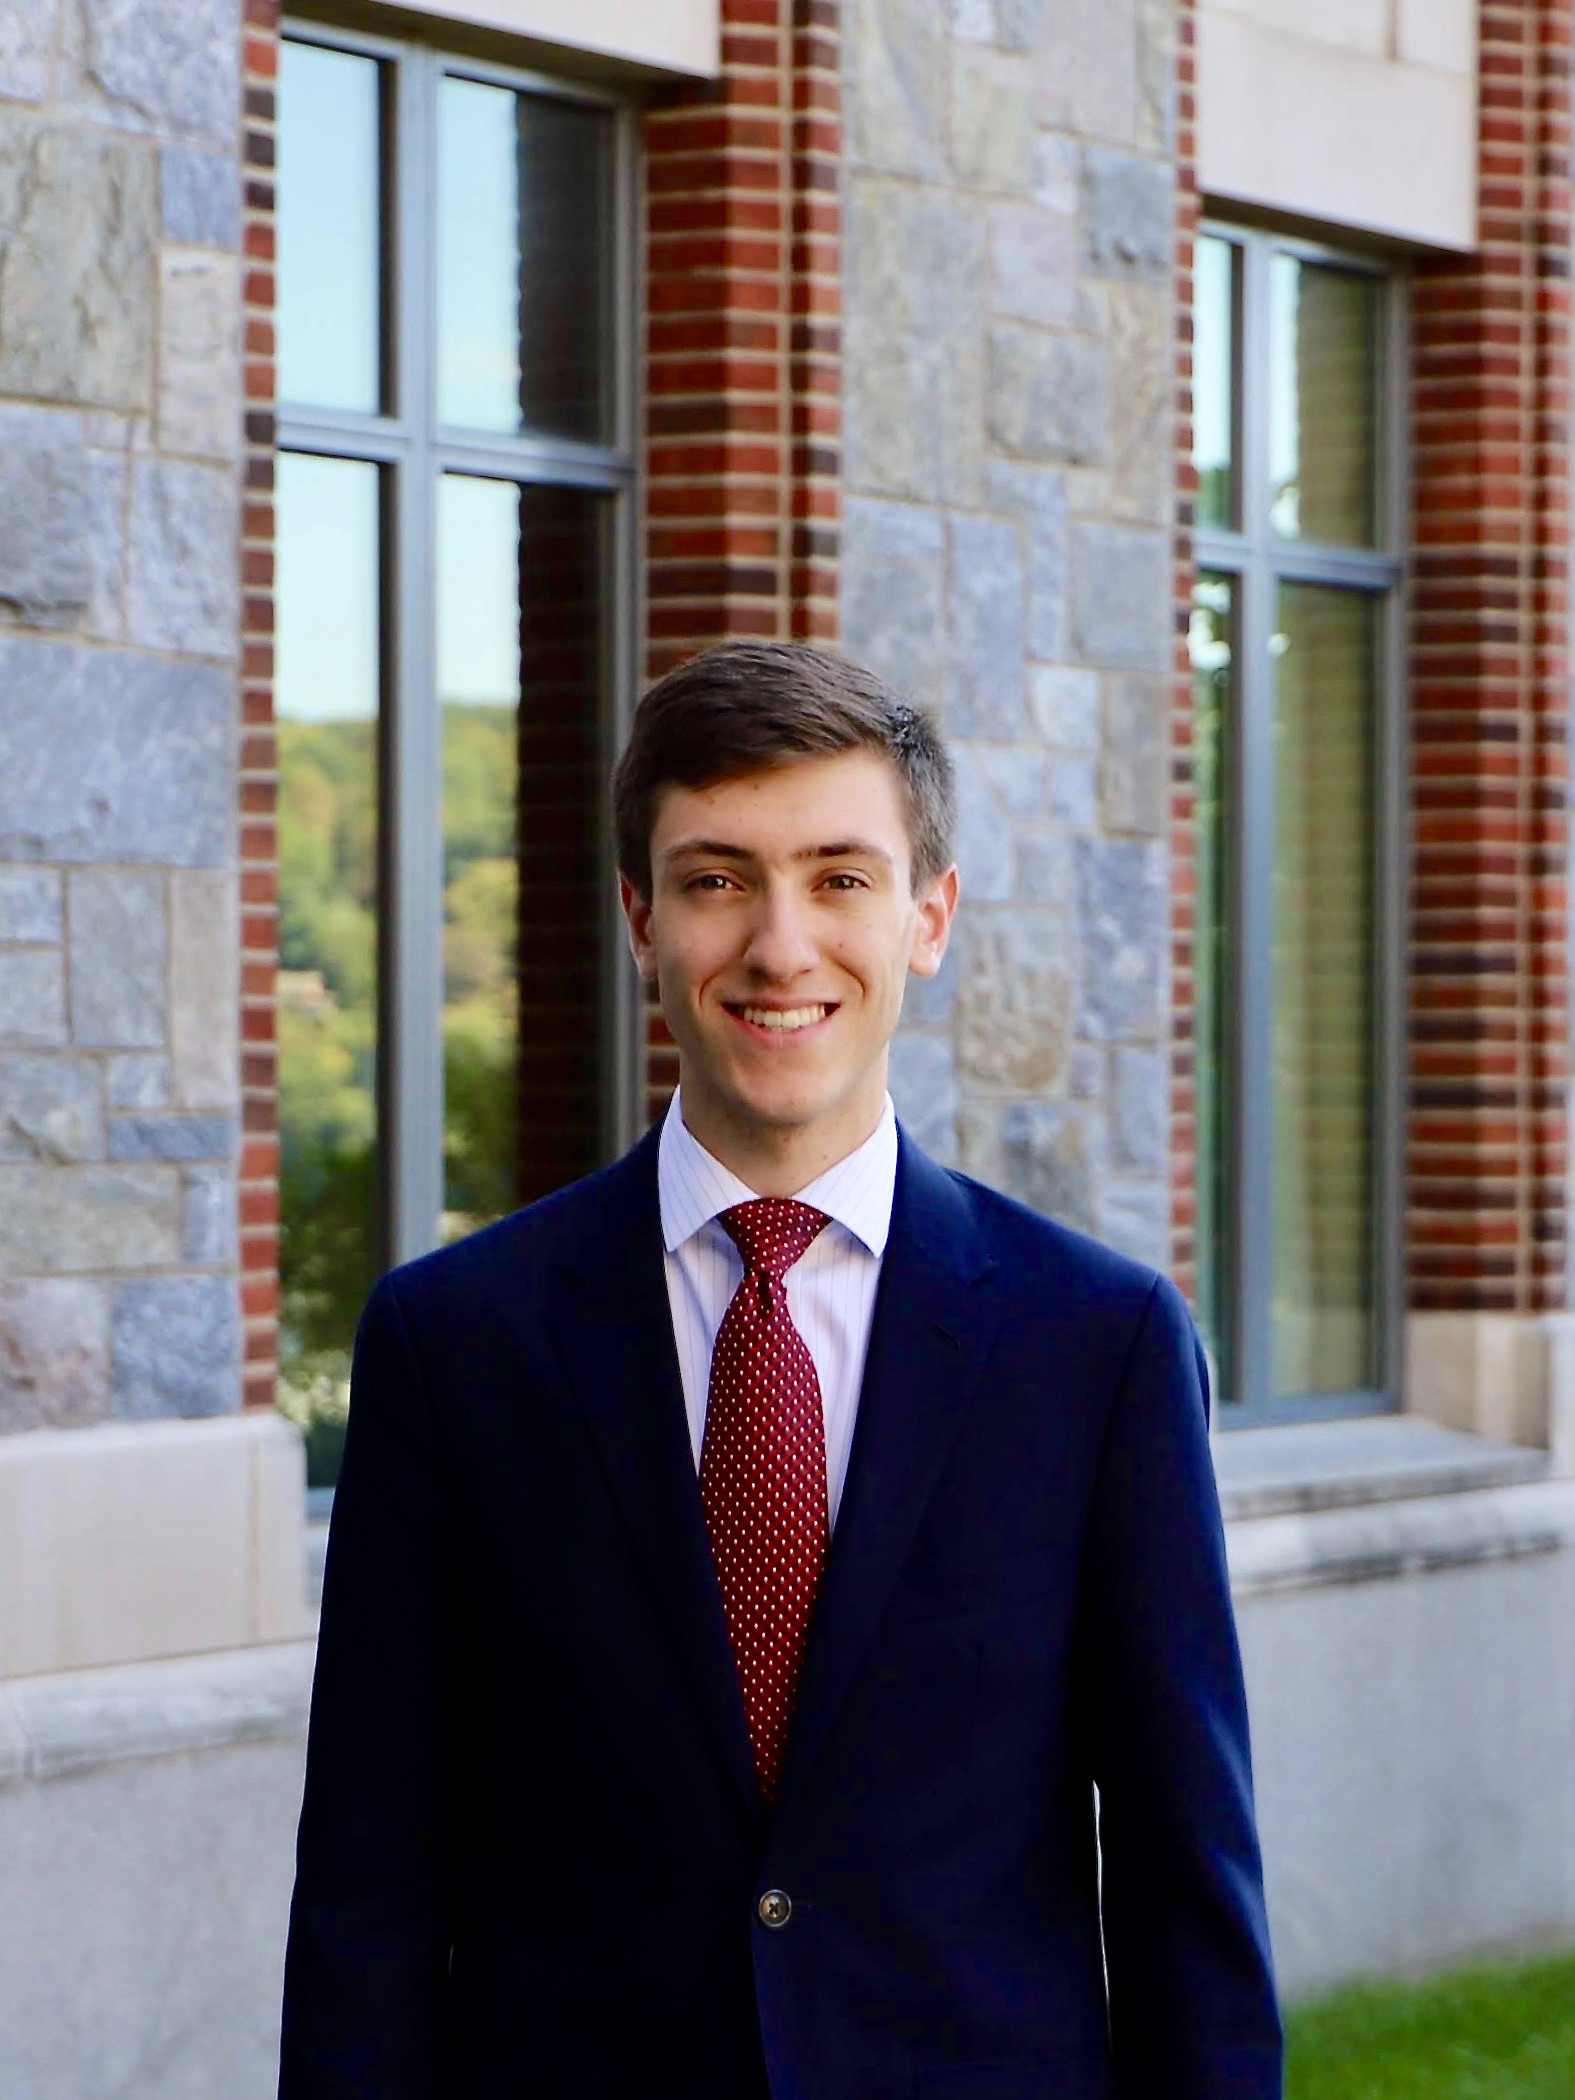 Spencer, standing in a suit and tie beside a stone and brick building on the Marist College campus.